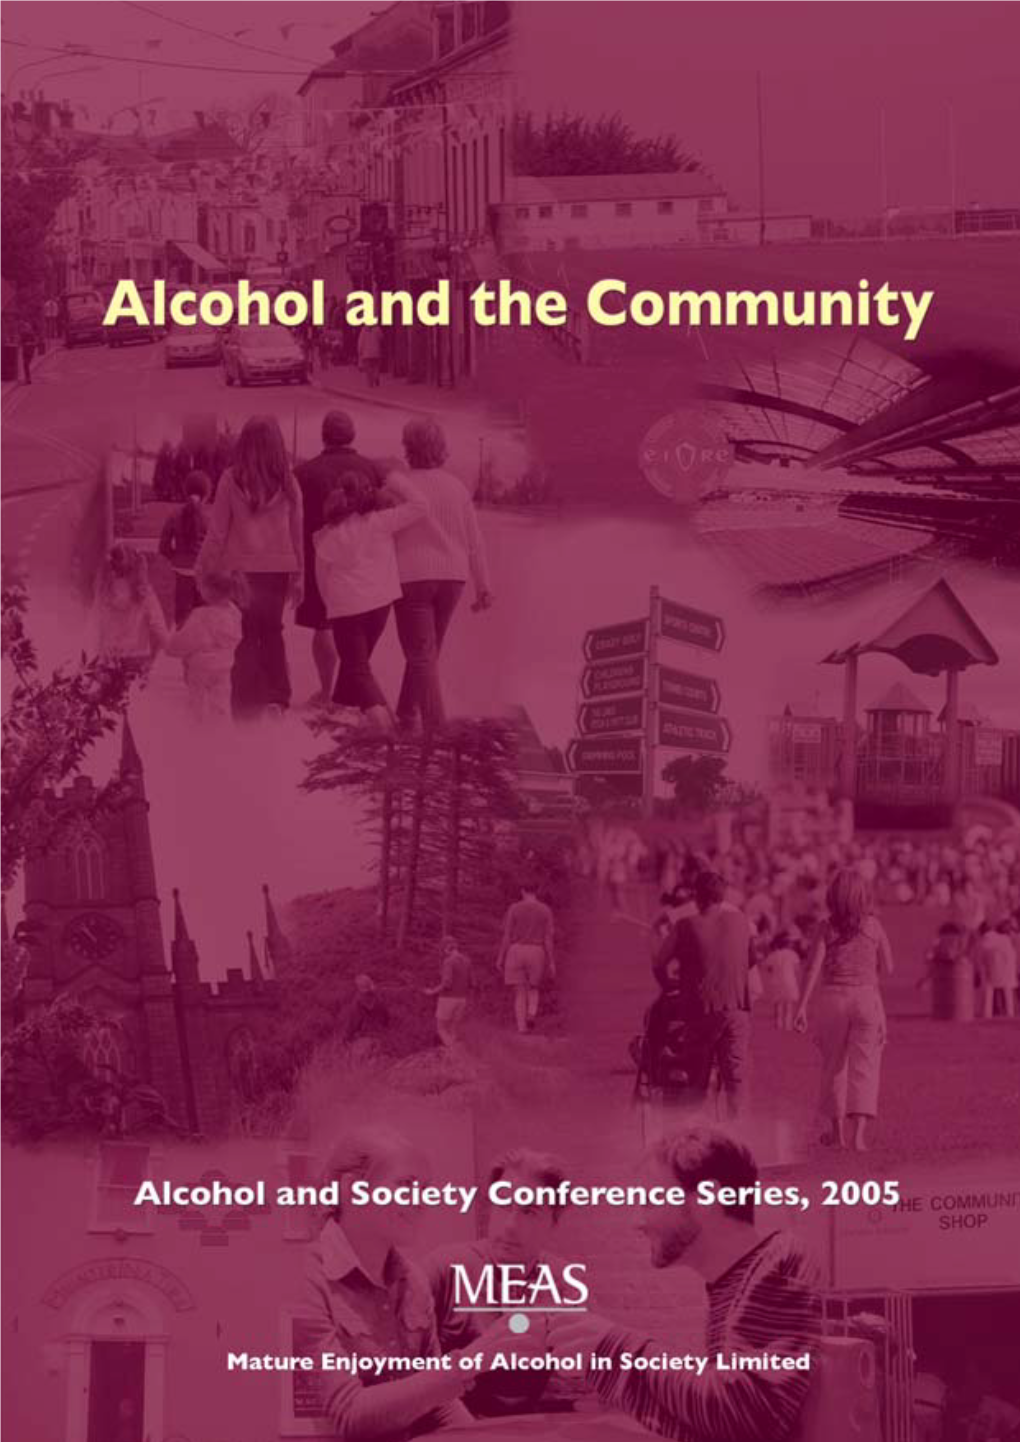 PDF (Alcohol and the Community Conference Proceedings)